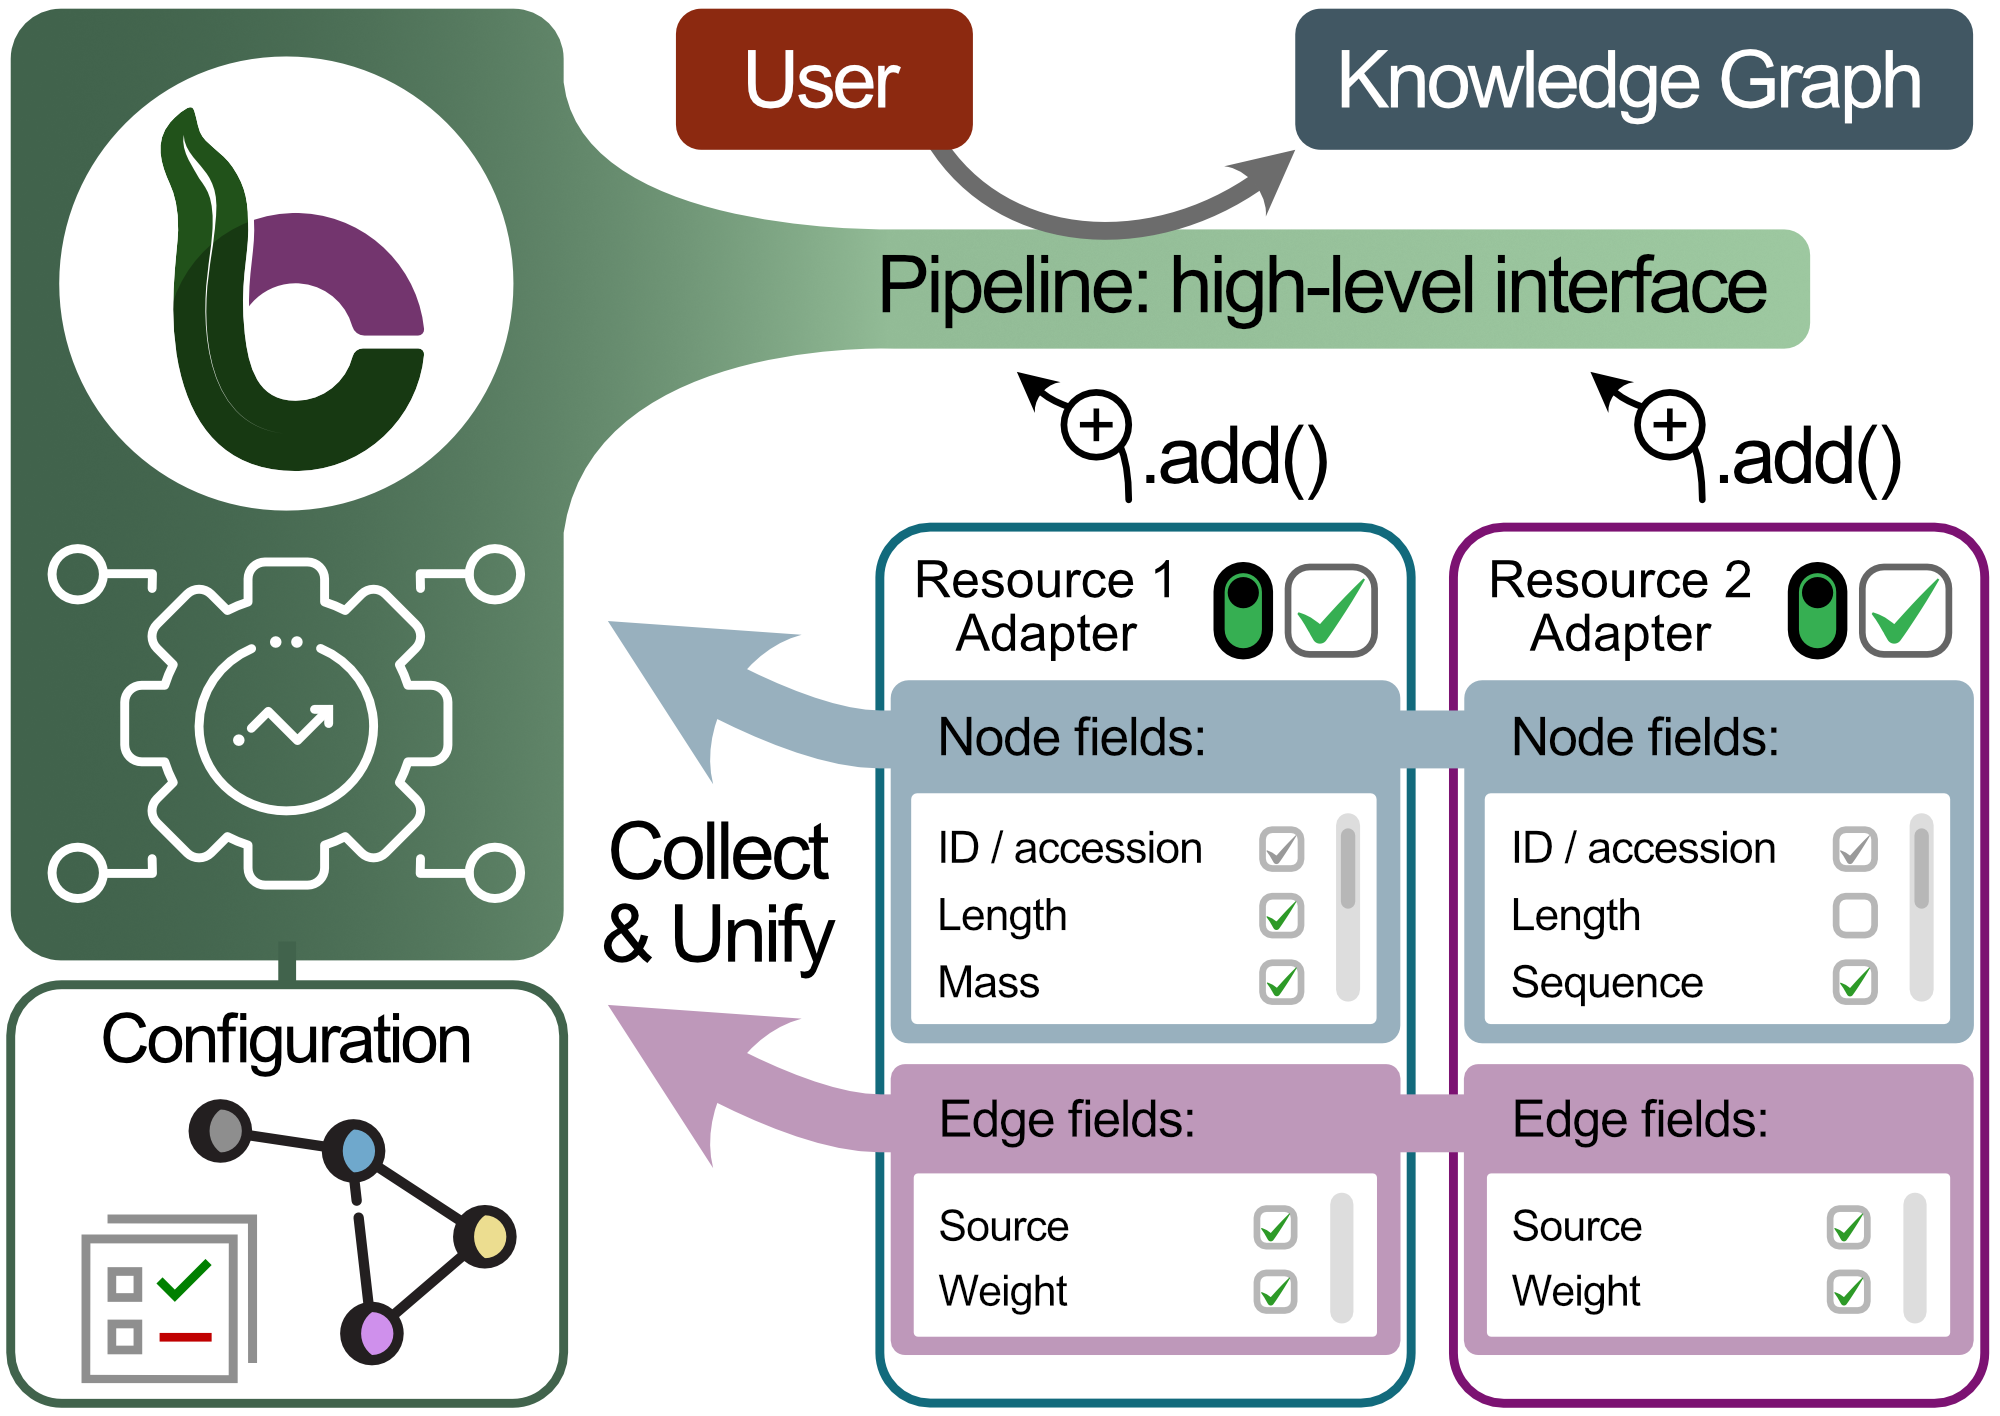 Figure 6: User interface. BioCypher provides high-level users with an abstracted pipeline interface that is used to aggregate data from primary adapters while collecting and unifying the individual data inputs. Configuration needs to take place only globally when combining adapters that provide overlapping identifier systems, which can be assessed through the pipeline interface. This is useful to synchronise proprietary or sensitive data between single locations in a federated learning pipeline, since the adapters that contain non-public data only need to provide non-sensitive, summary level information about the data they supply.